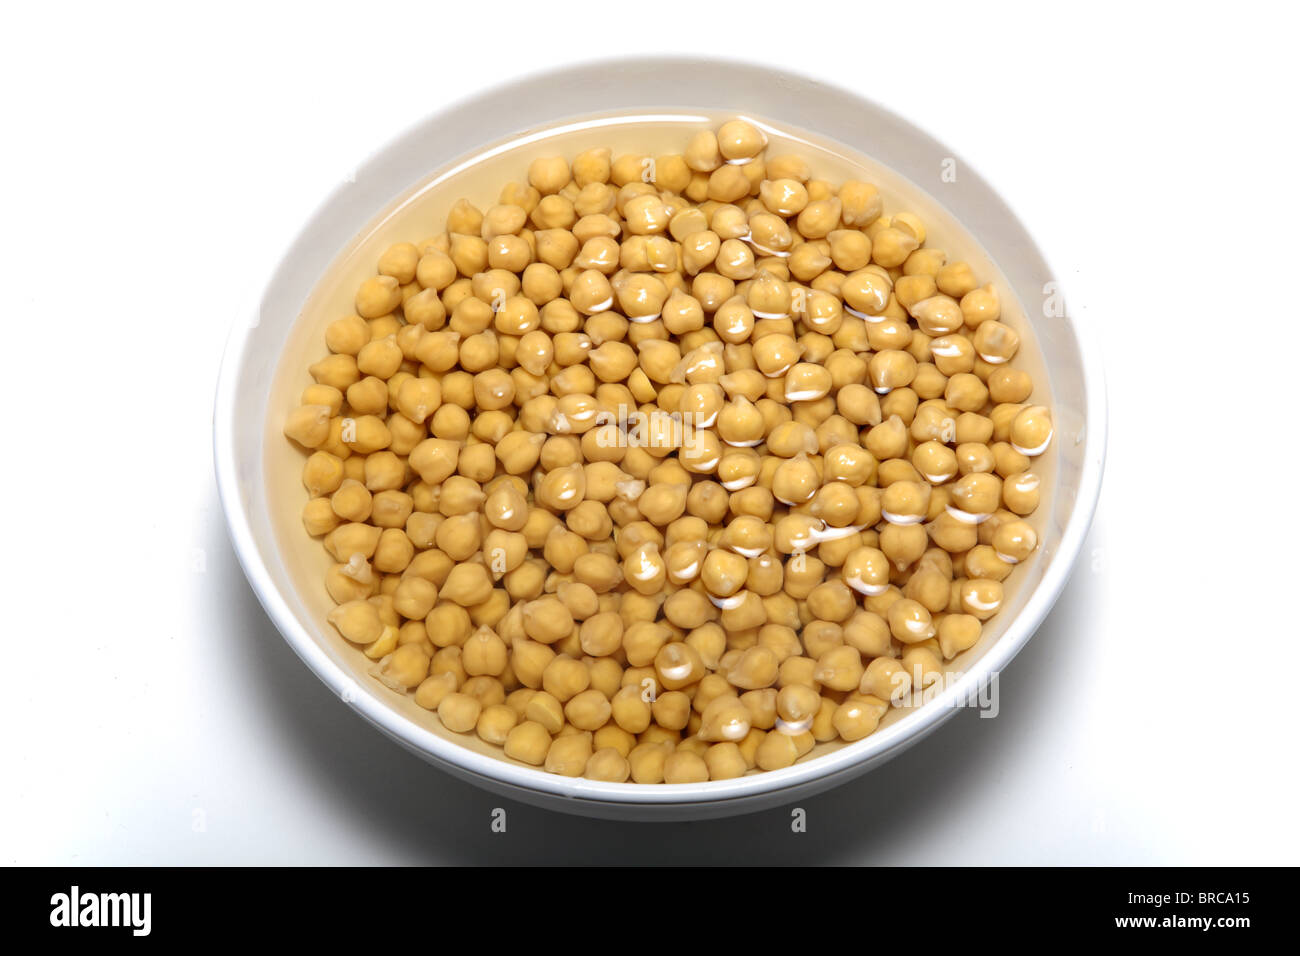 Chickpeas soaking in water. Stock Photo